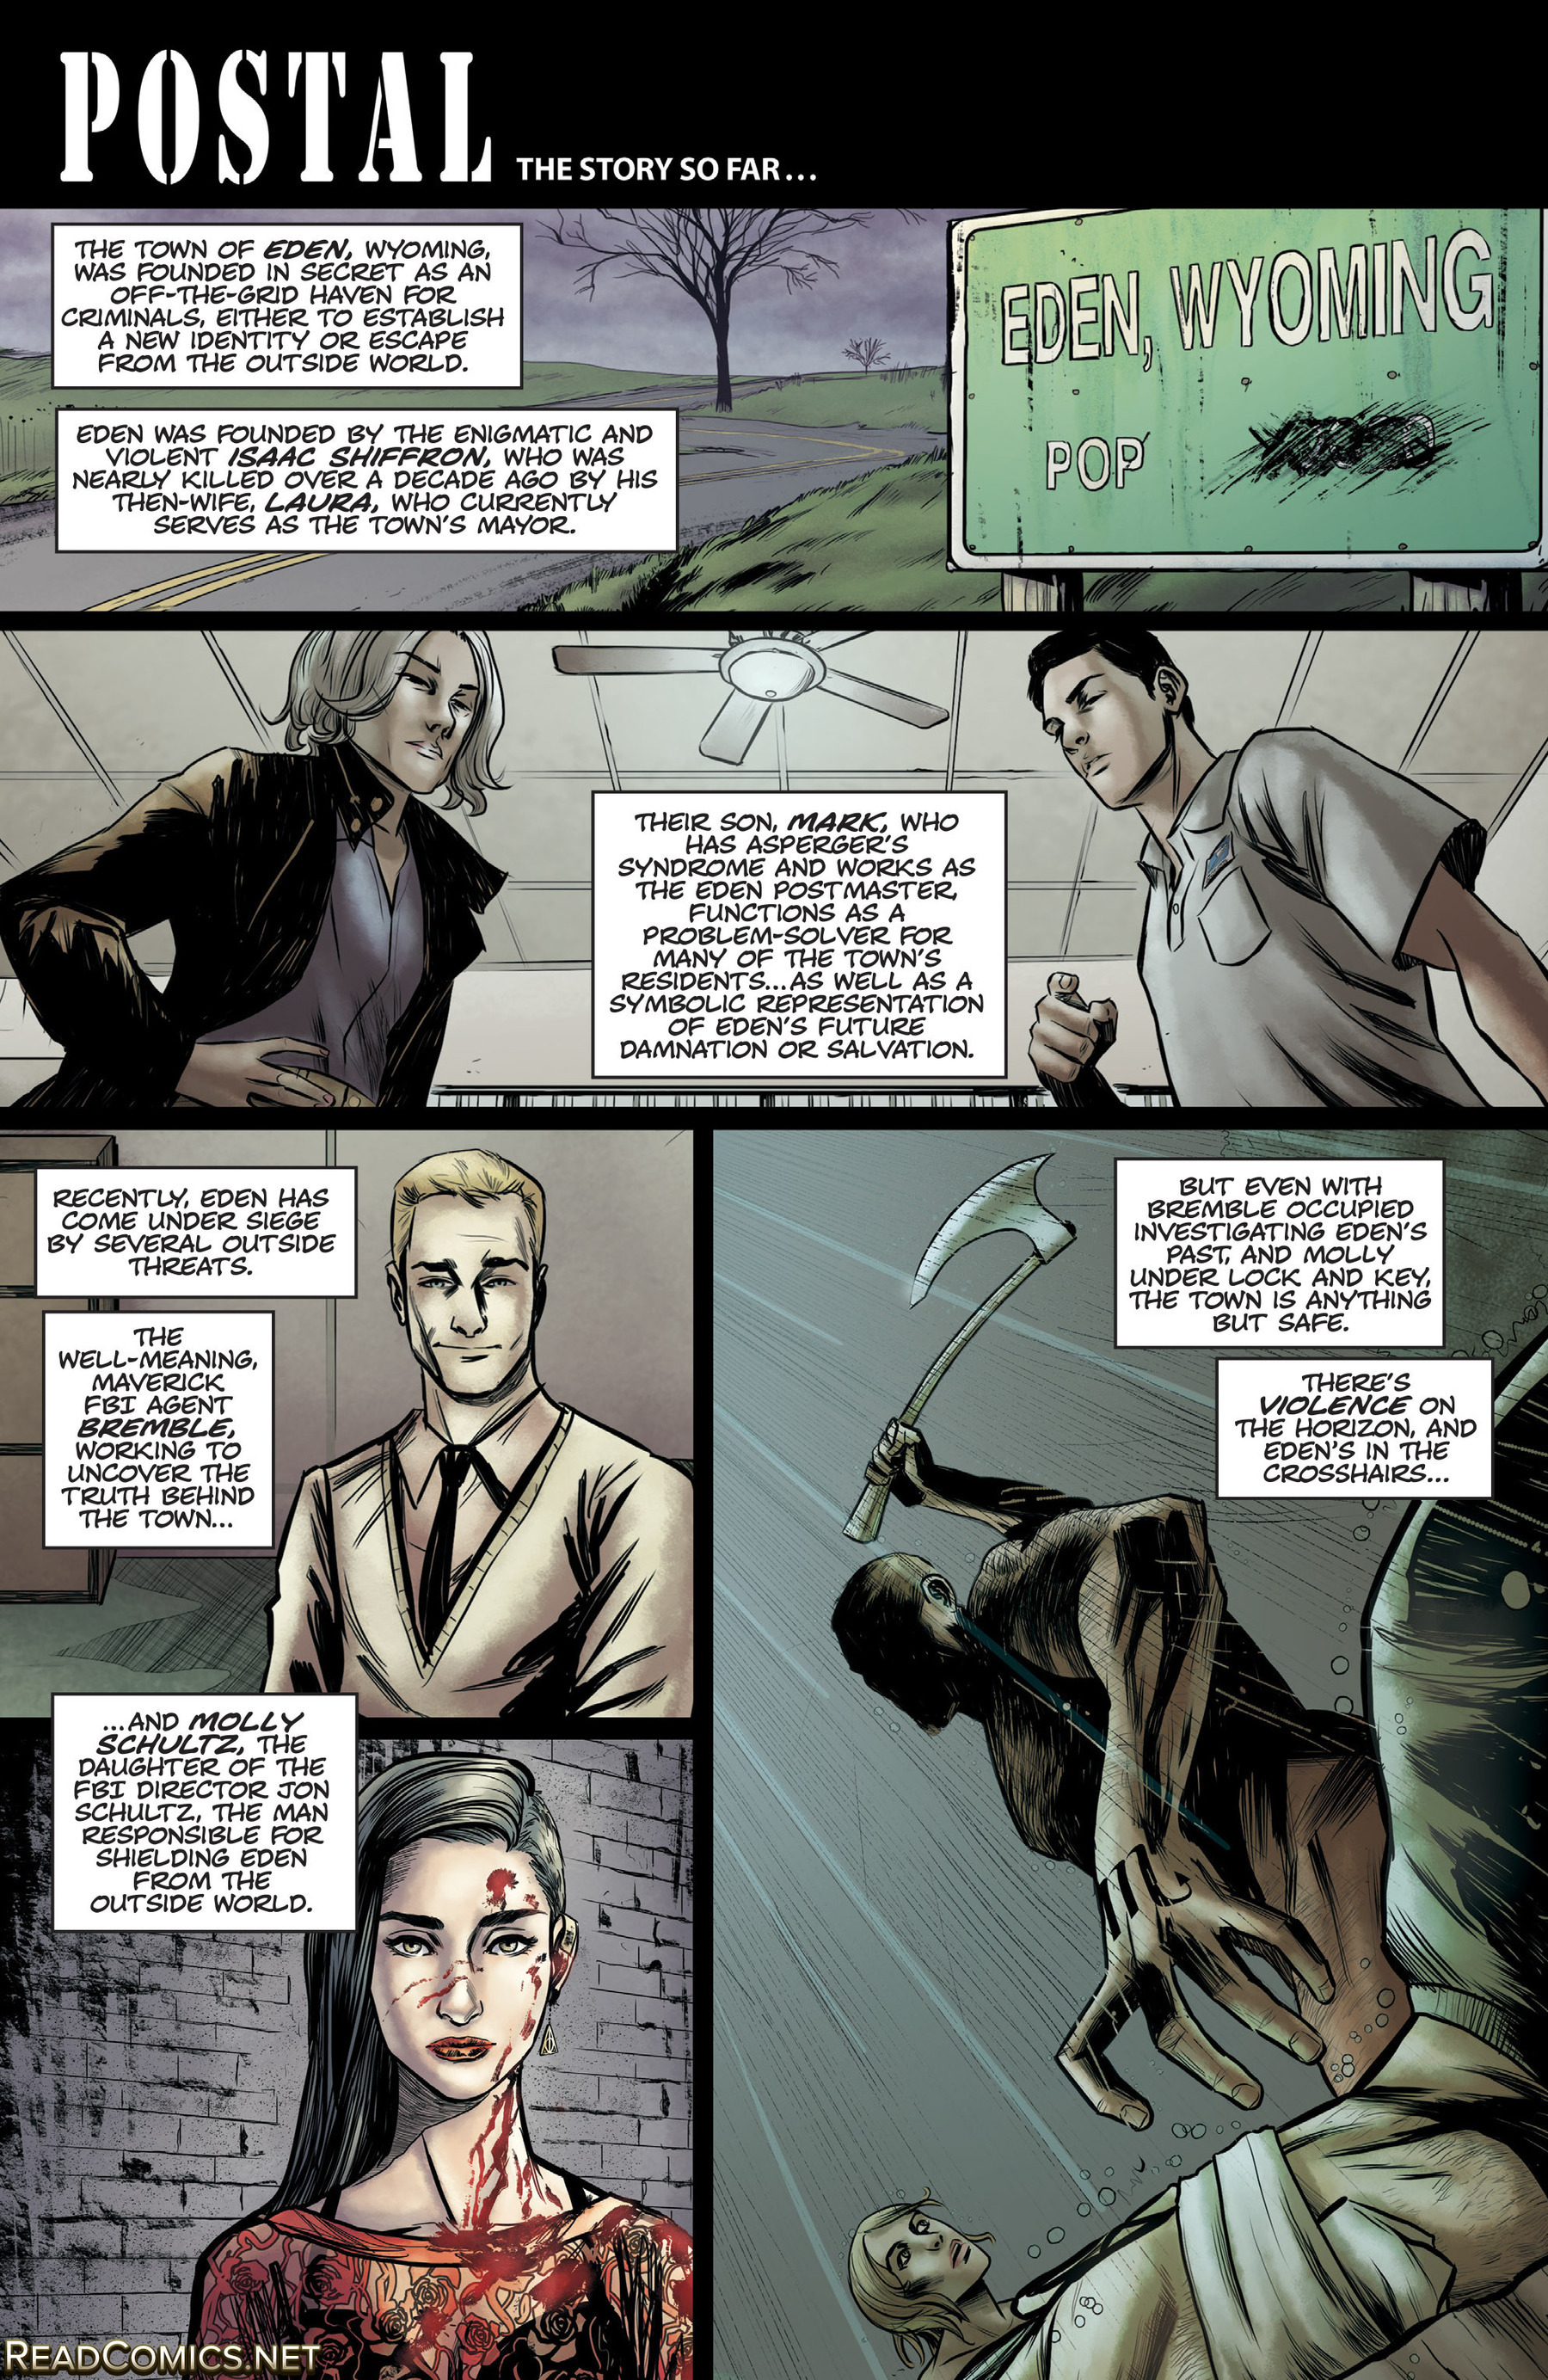 Postal (2015-): Chapter 13 - Page 3